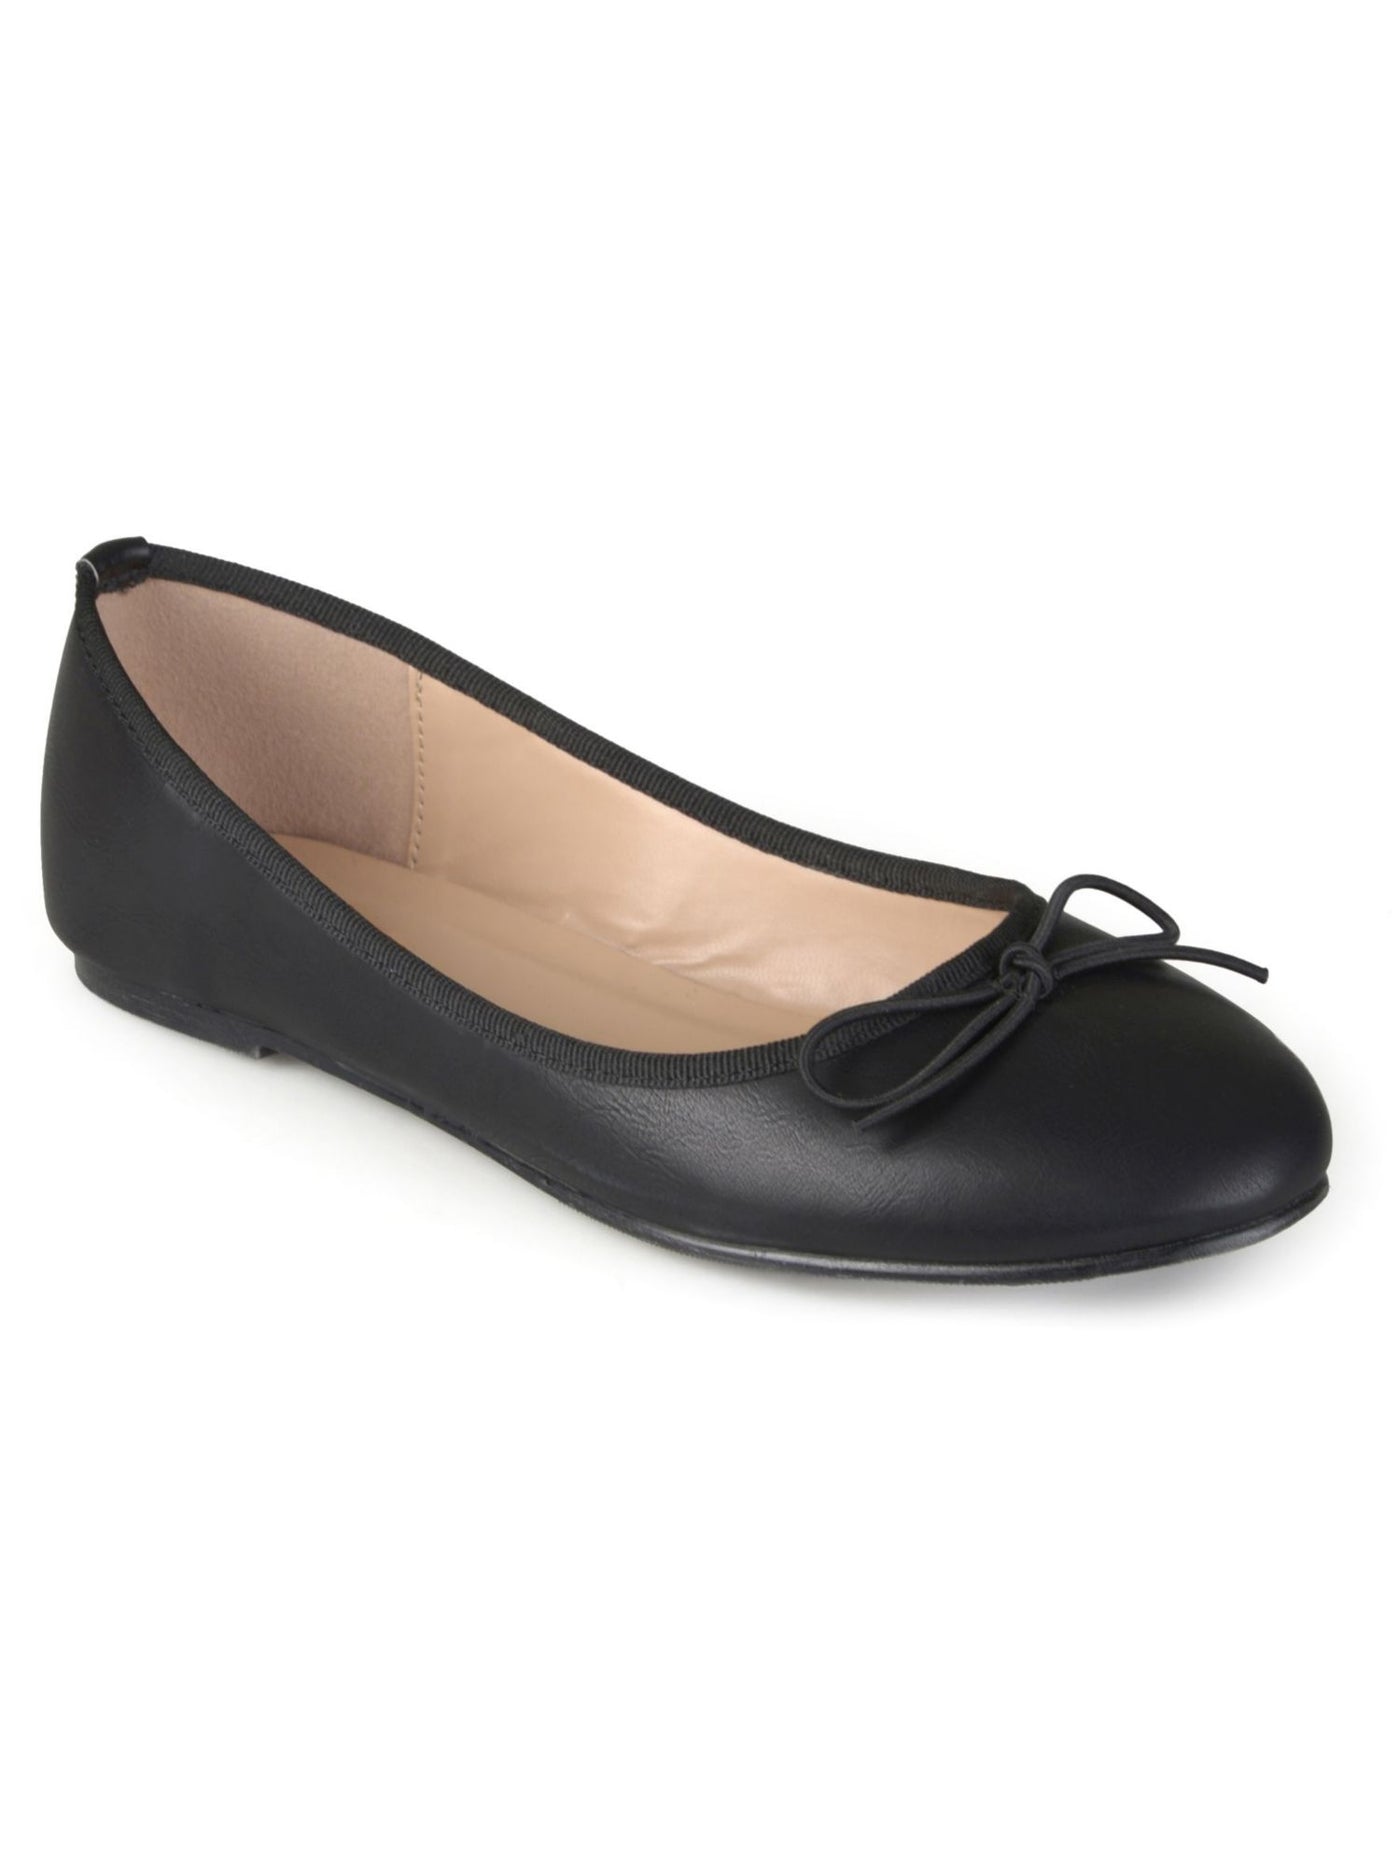 JOURNEE COLLECTION Womens Black Bow Accent Padded Vika Round Toe Slip On Ballet Flats 8